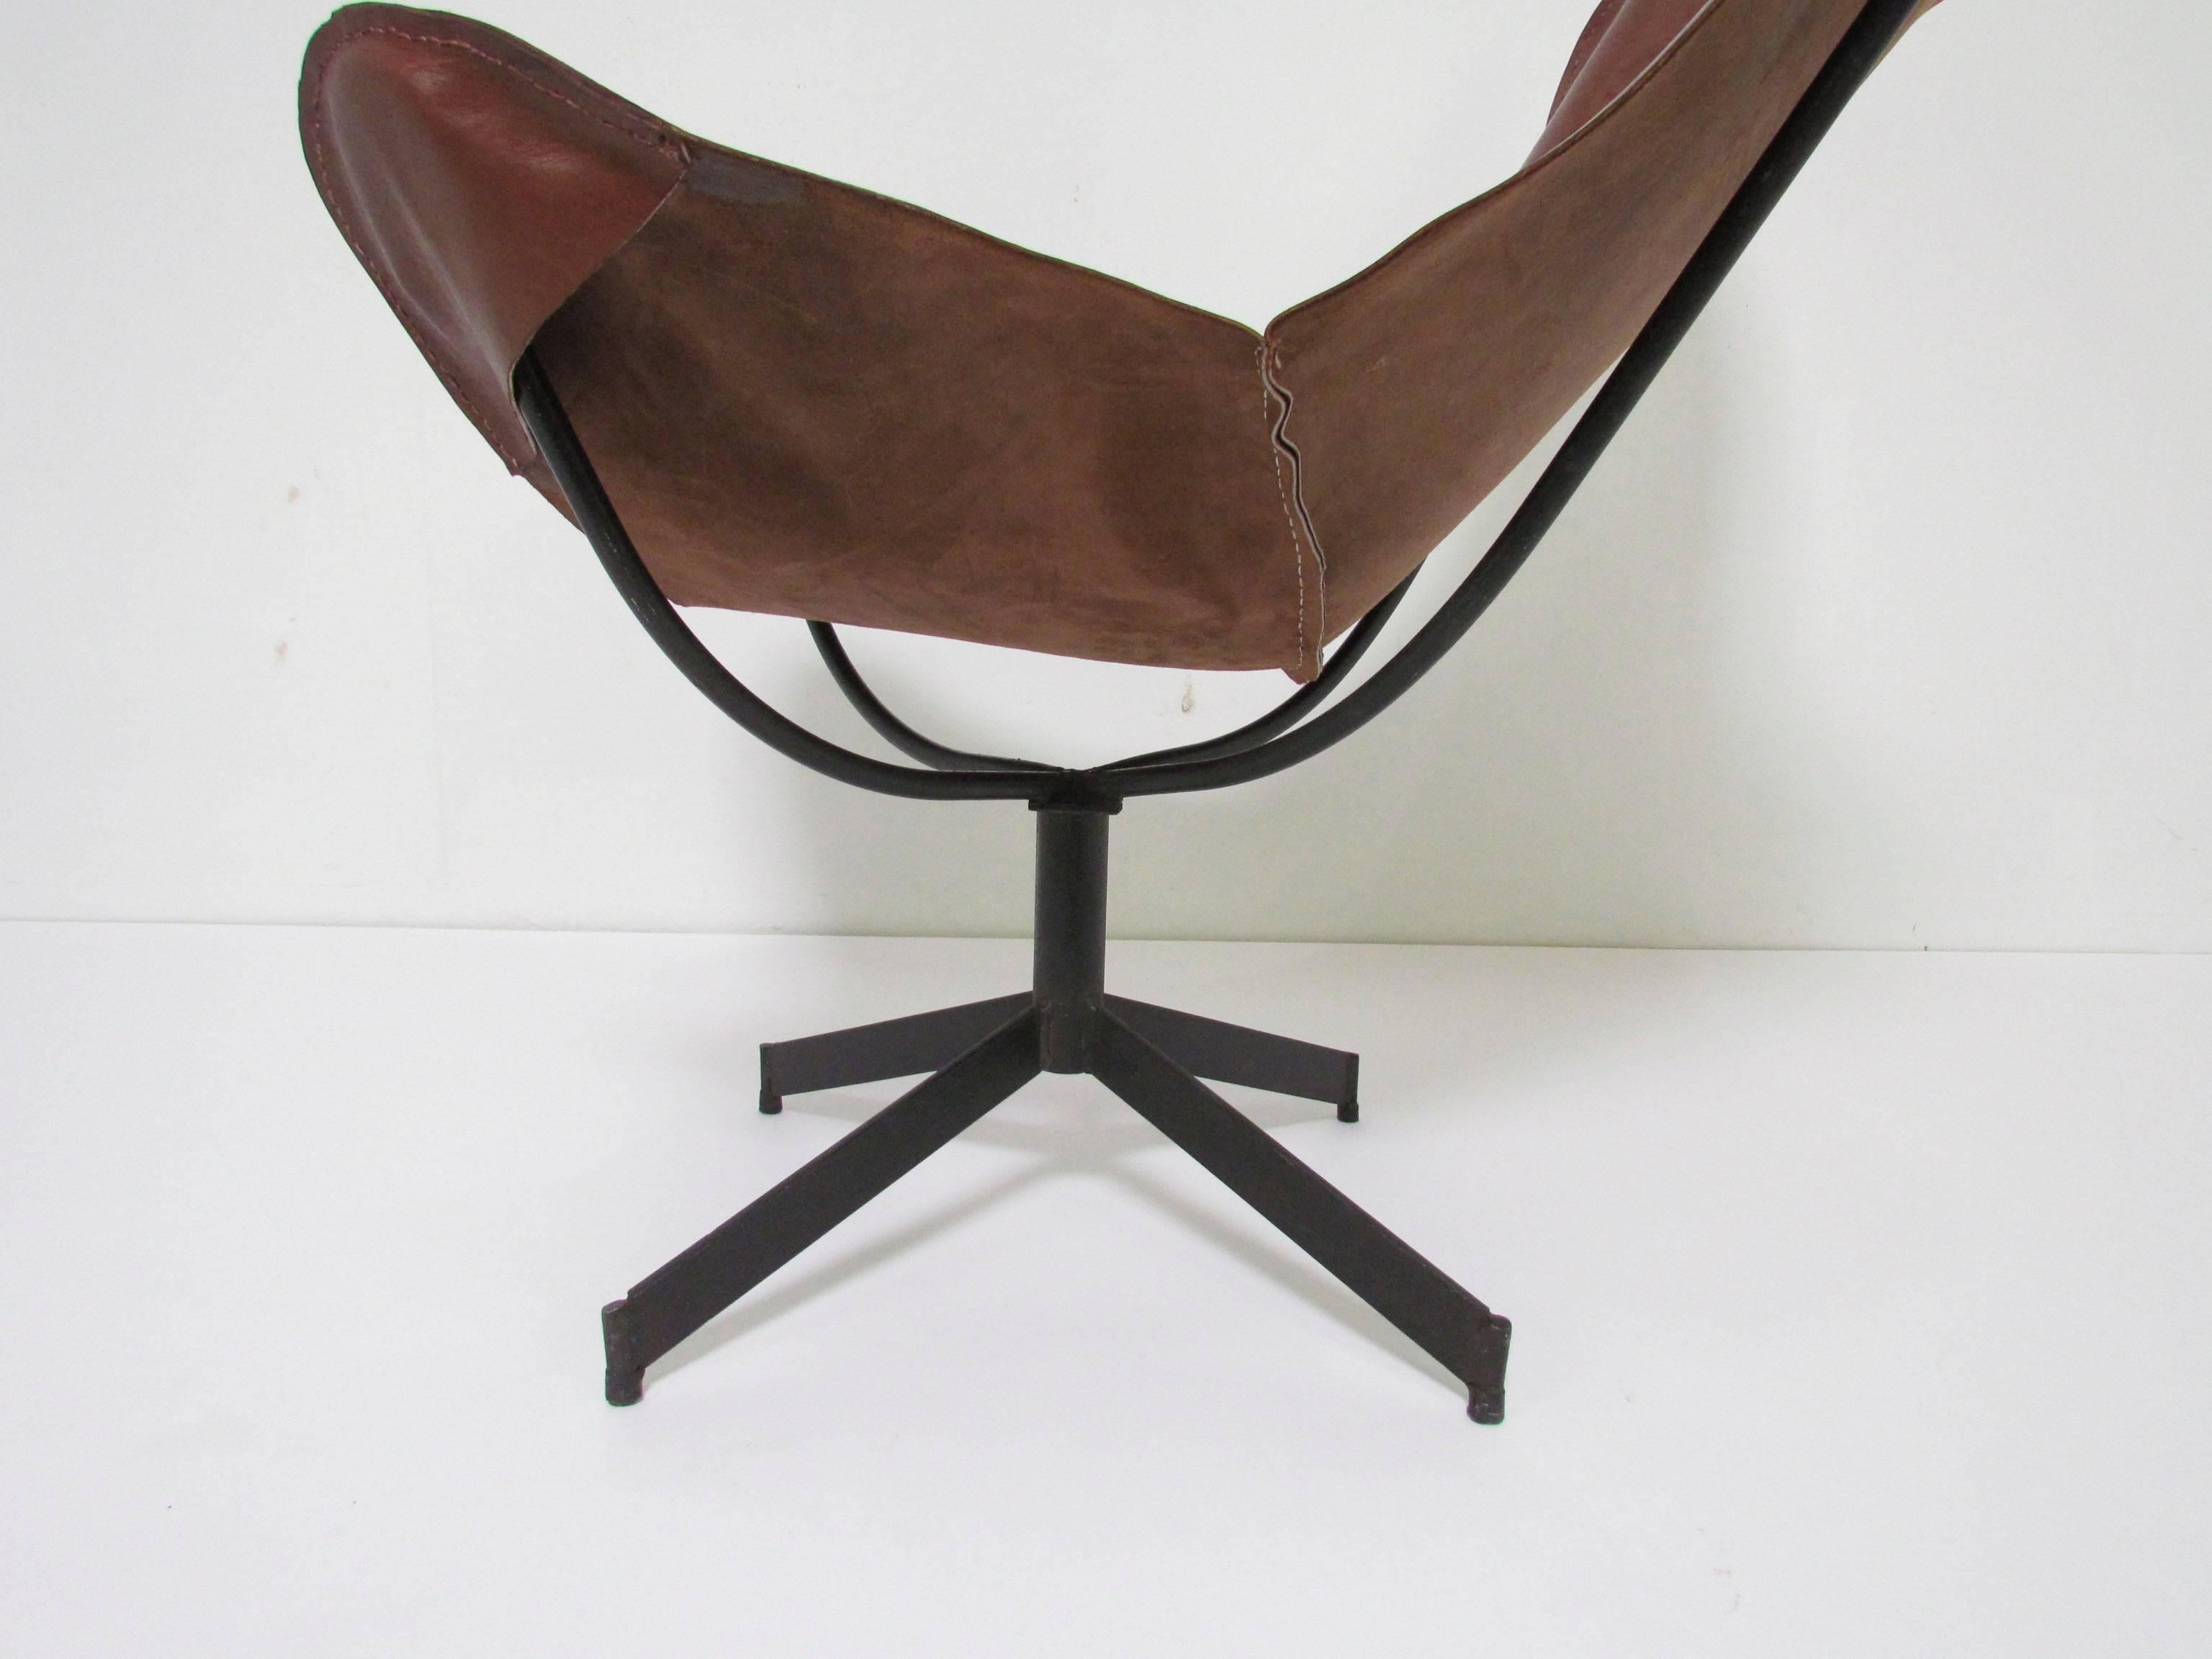 Steel Swivel Leather Sling Lounge Chair by Leathercrafter, New York, circa 1960s